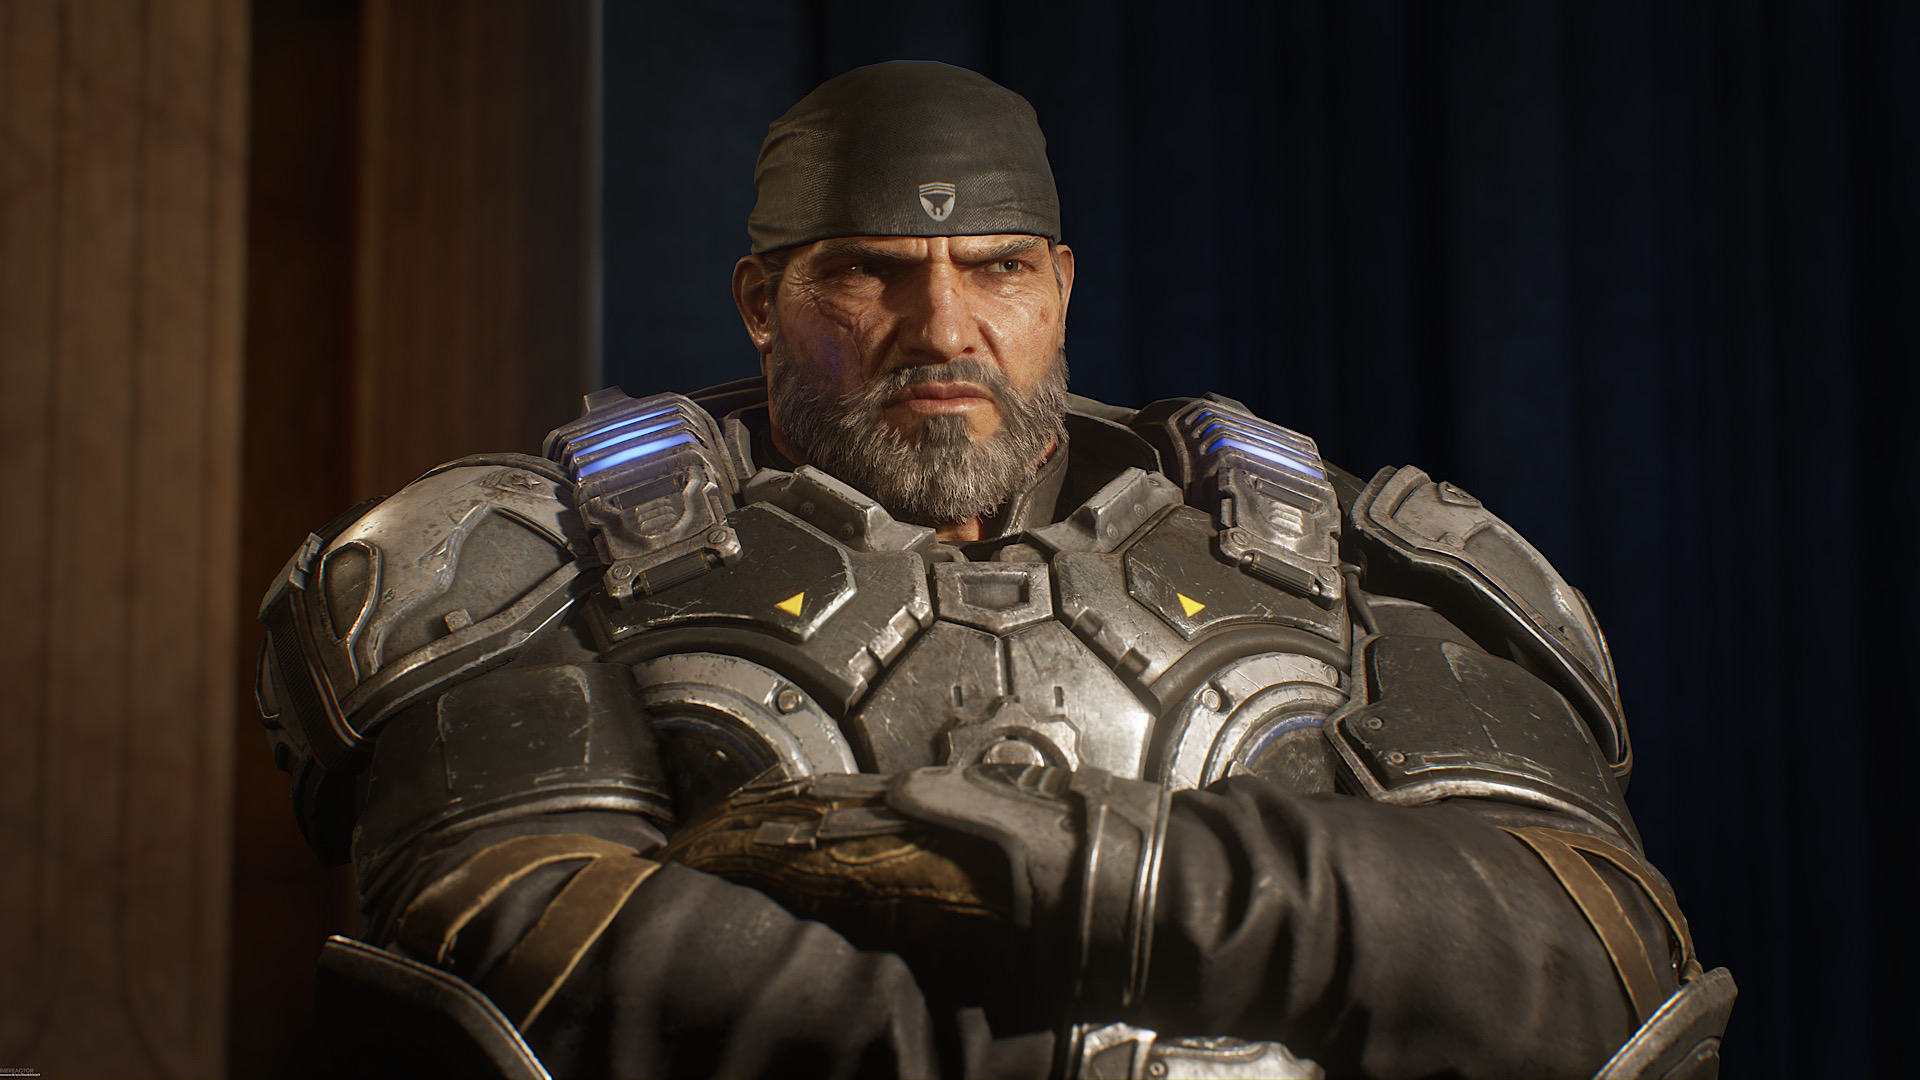 The OG Gears Of War trilogy is being remastered, says insider